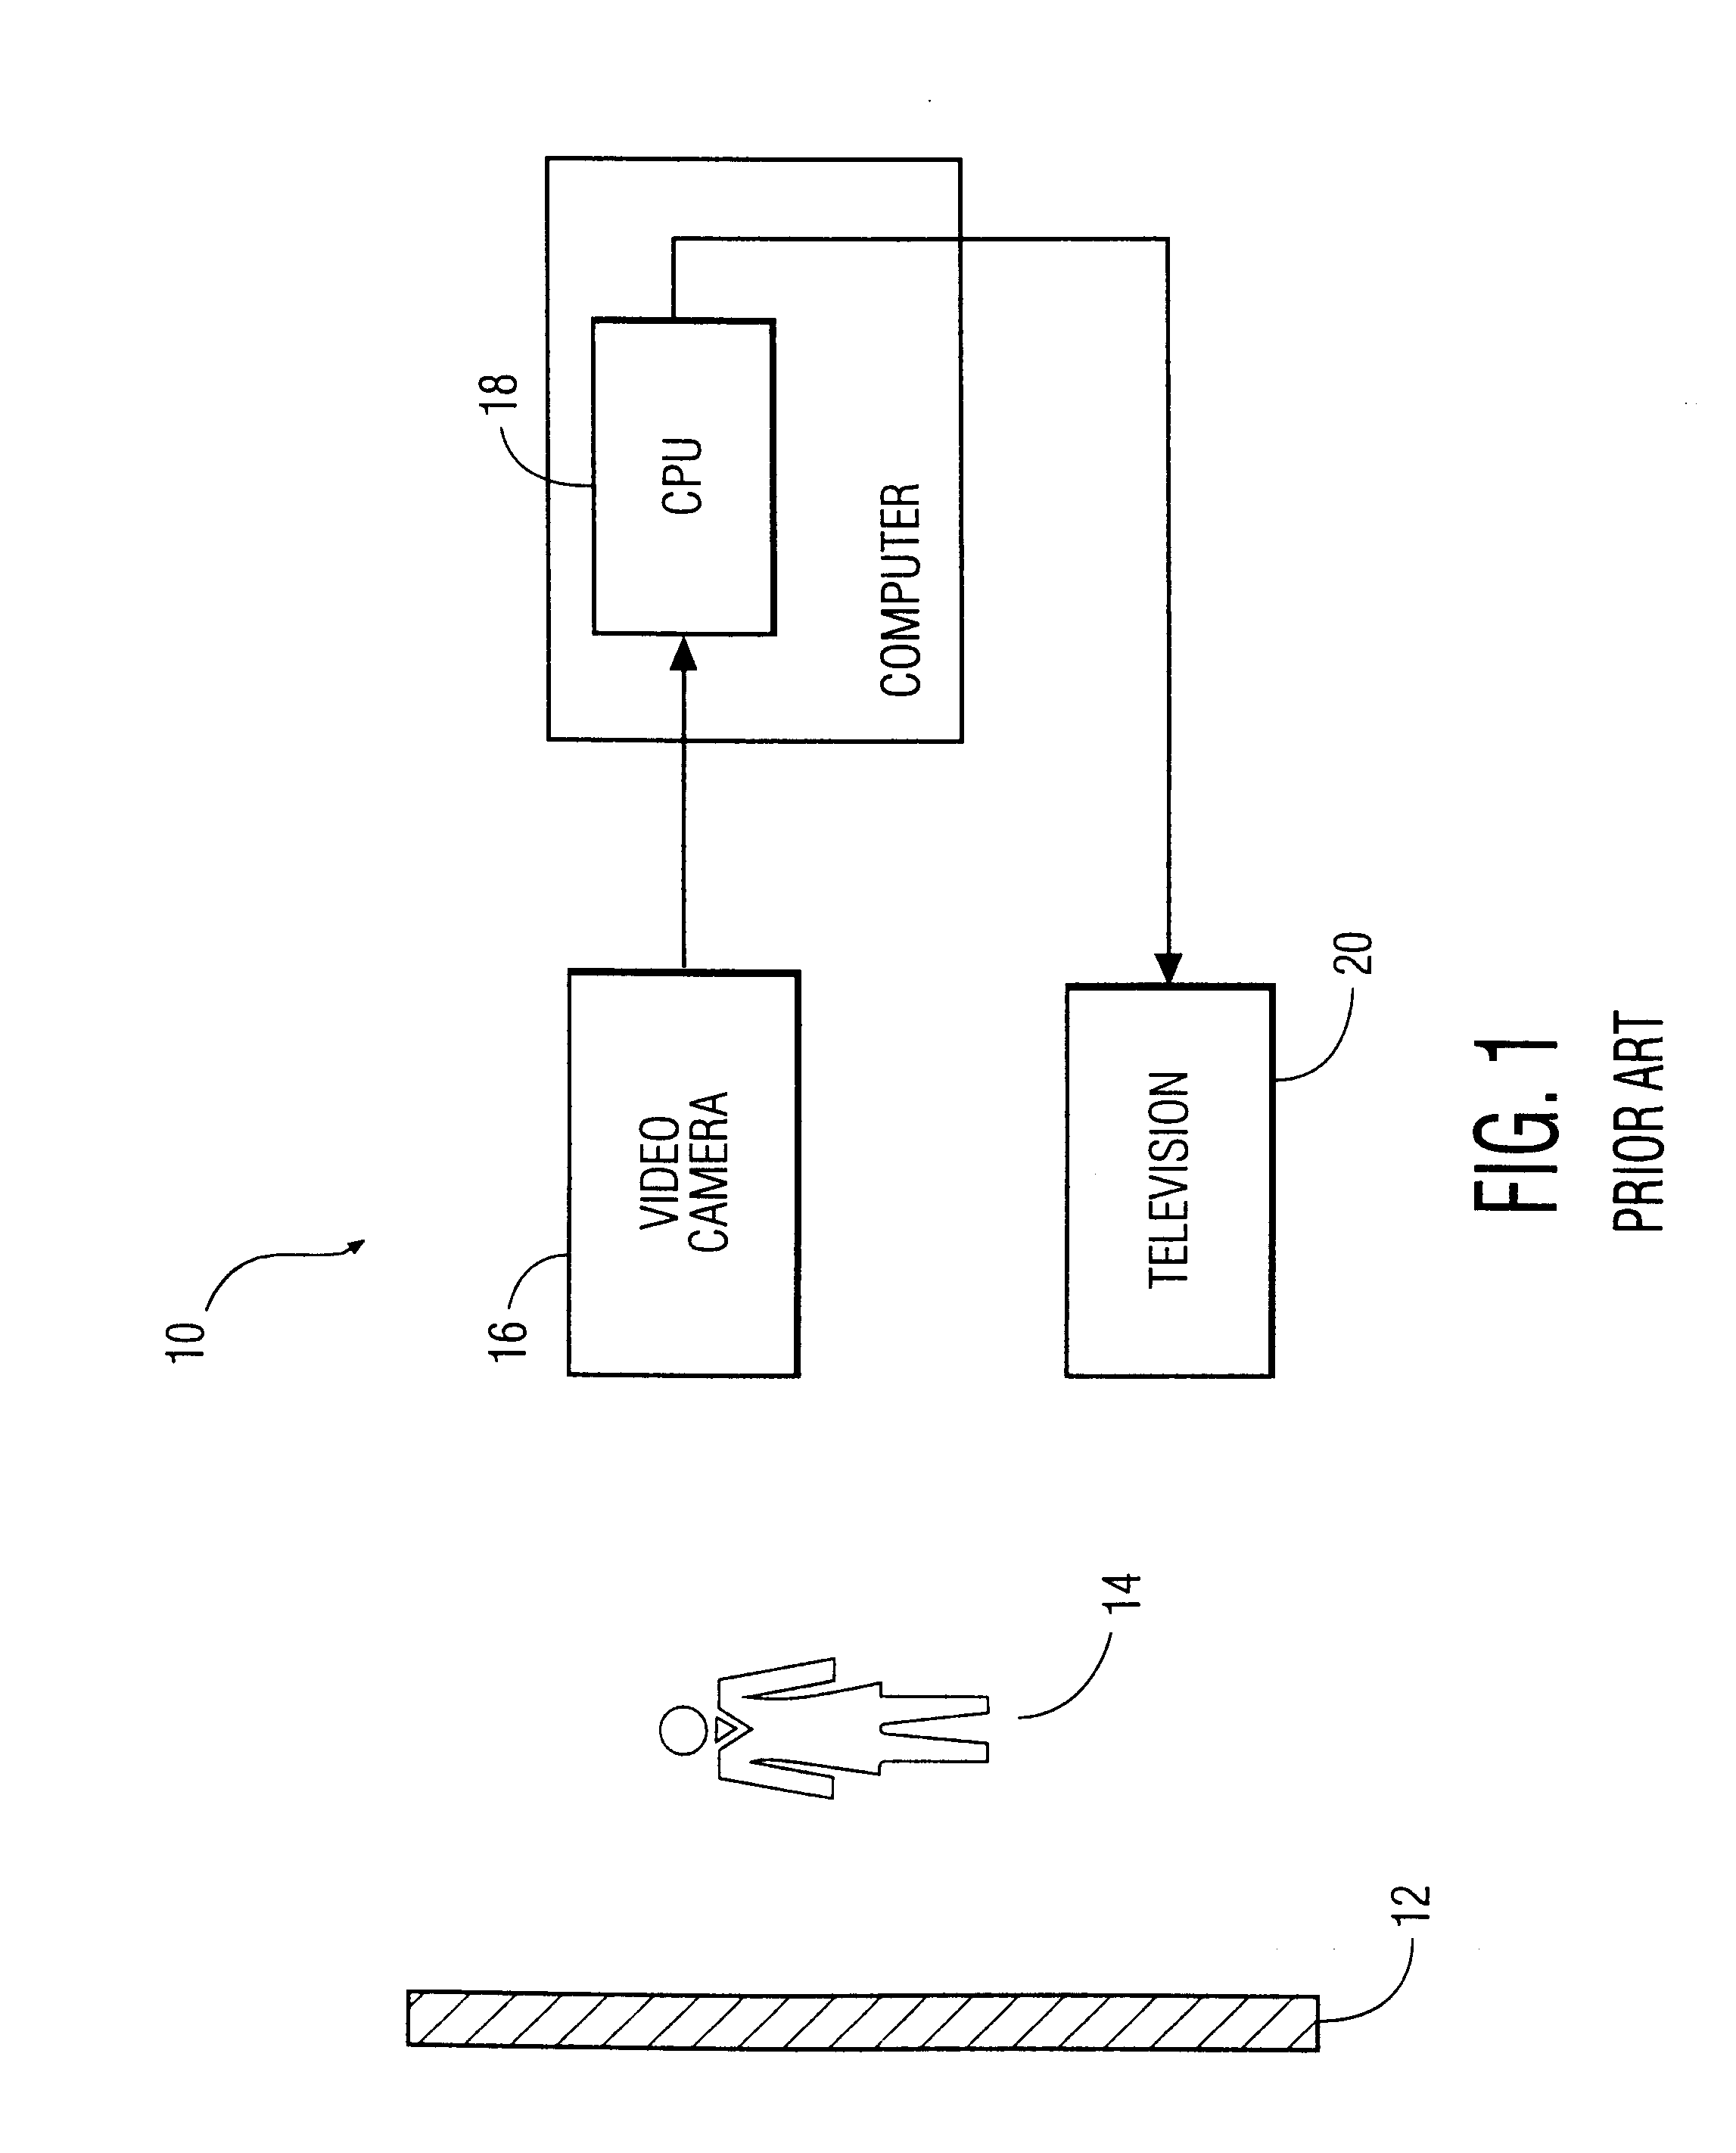 System and method for constructing three-dimensional images using camera-based gesture inputs